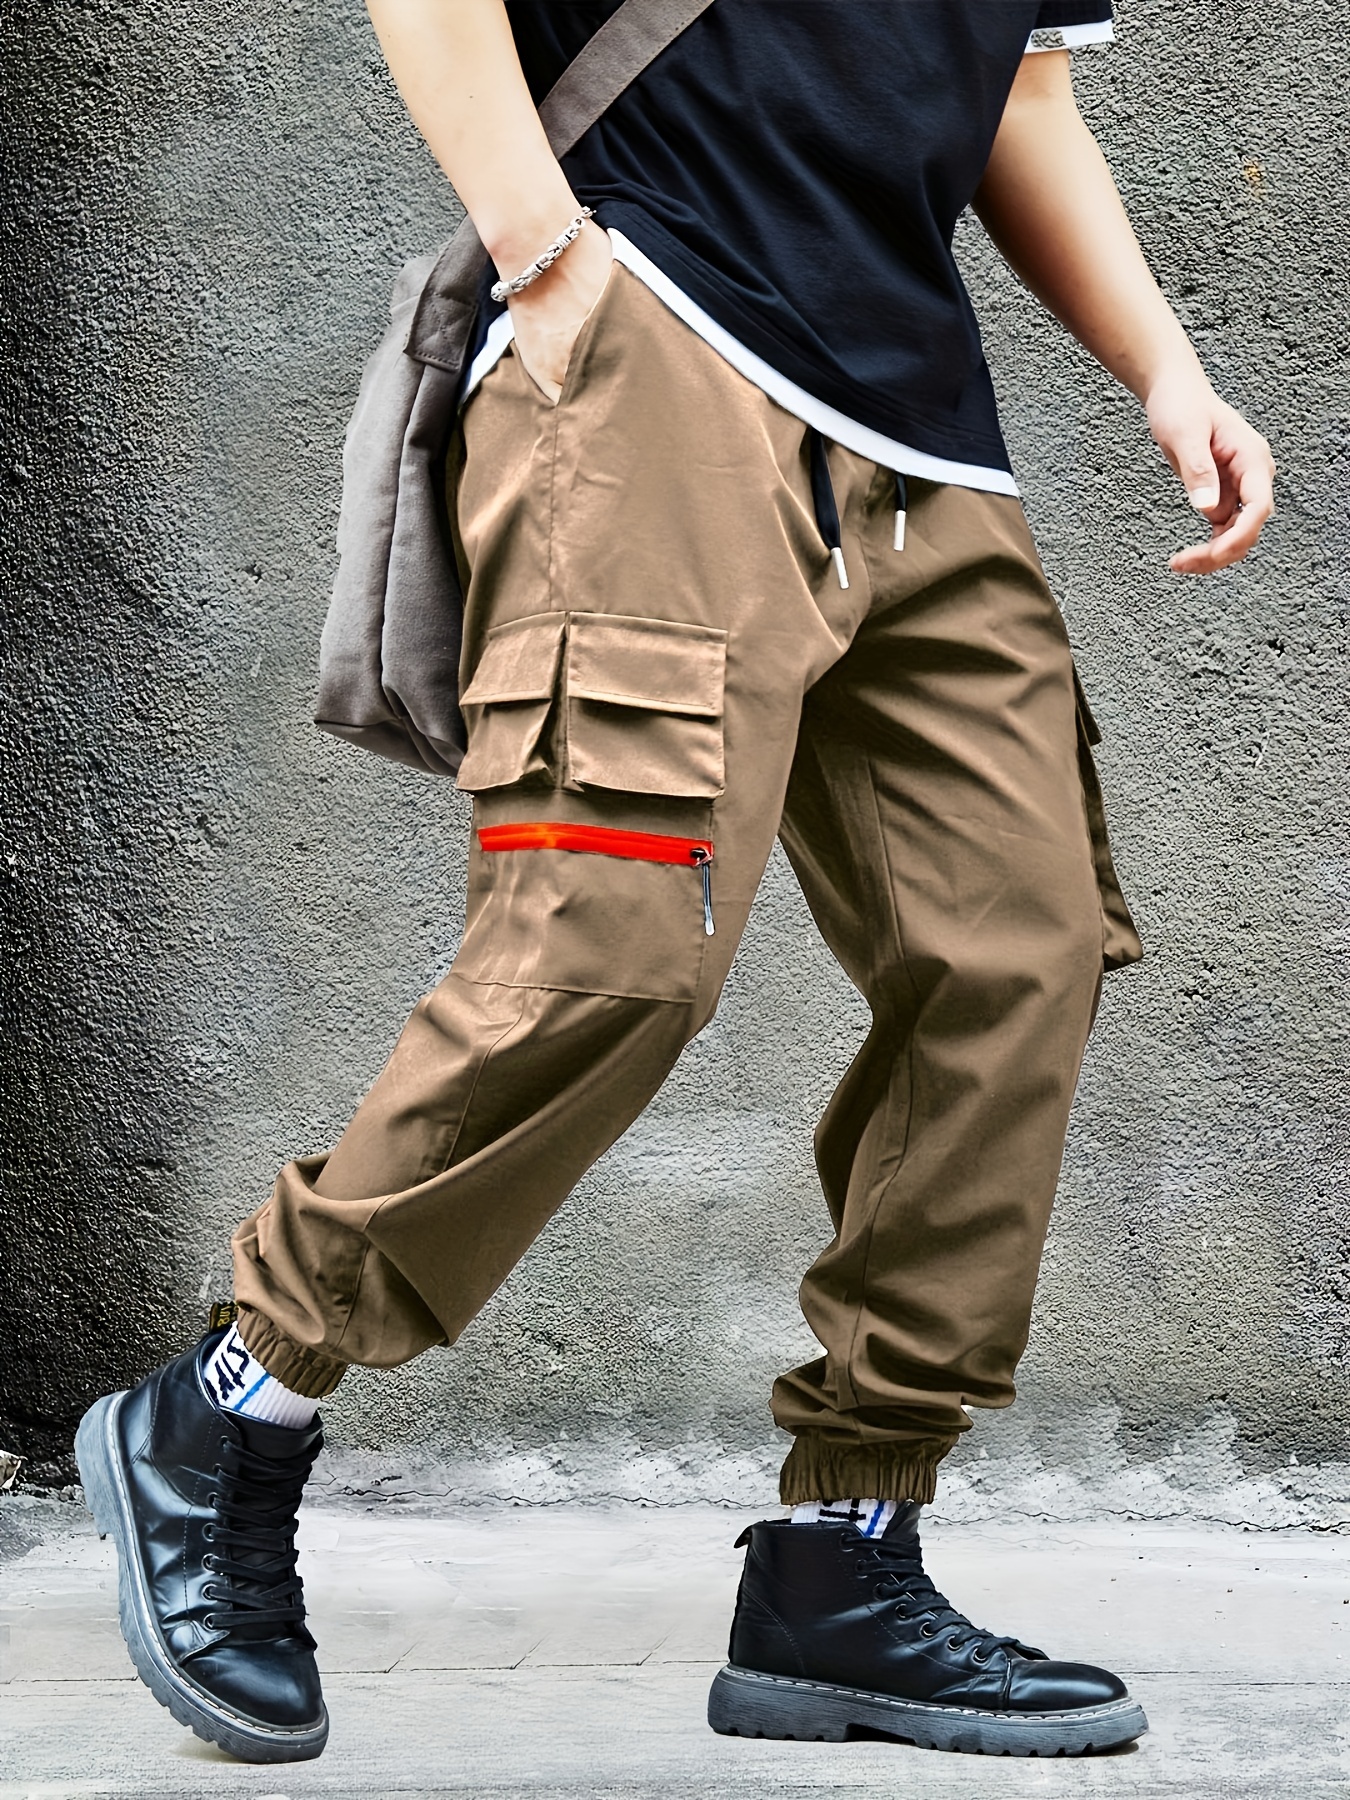 mens long pants multi pocket design for comfort style perfect for work mountaineering